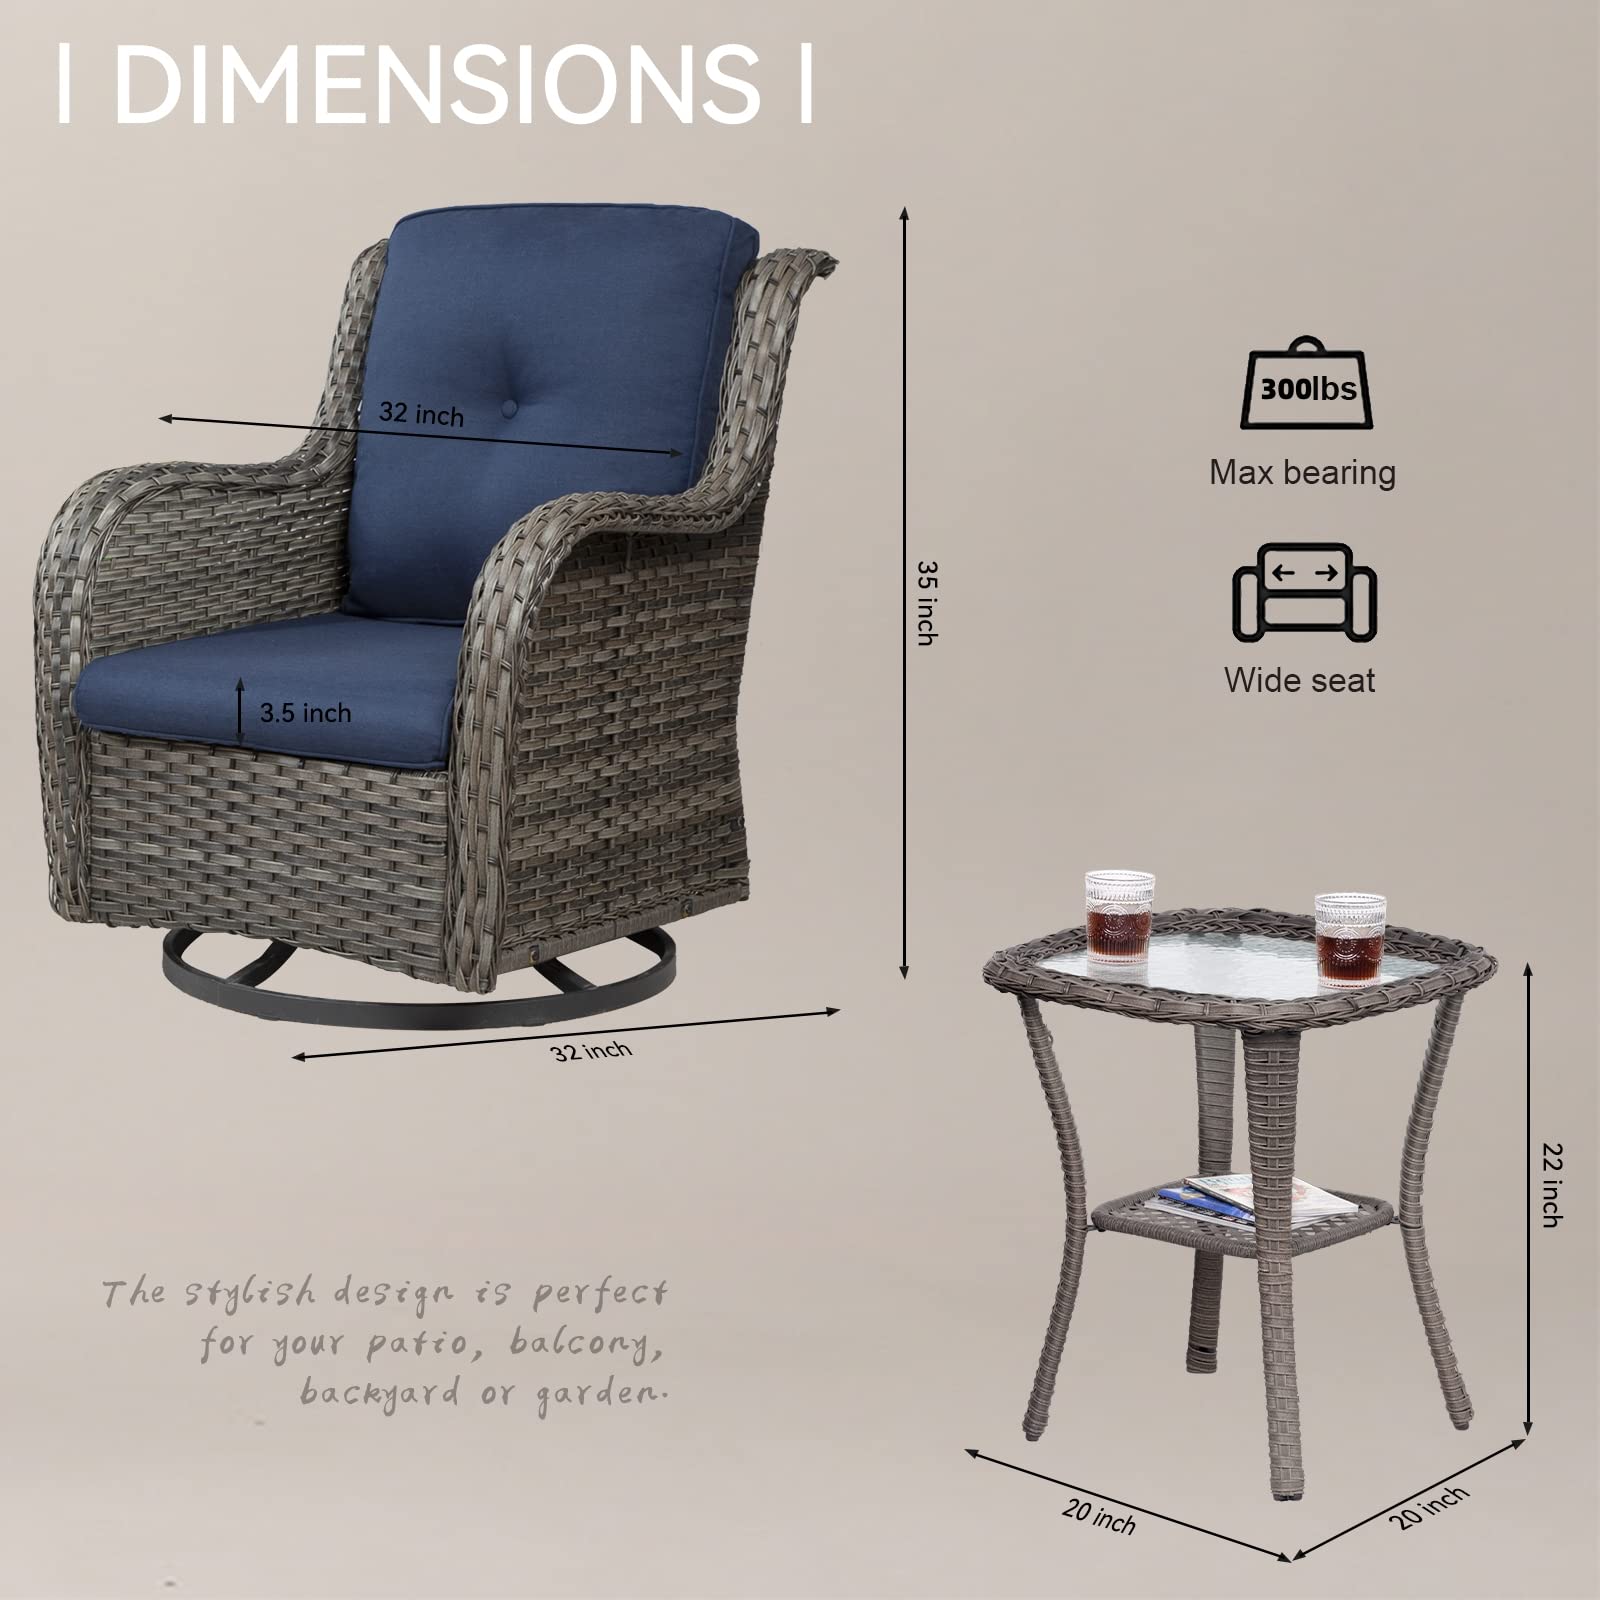 Joyside Outdoor Swivel Rocker Patio Chairs Set of 2 and Matching Side Table - 3 Piece Wicker Patio Bistro Set with Premium & Soft Fabric Cushions(Mixed Grey/Blue)